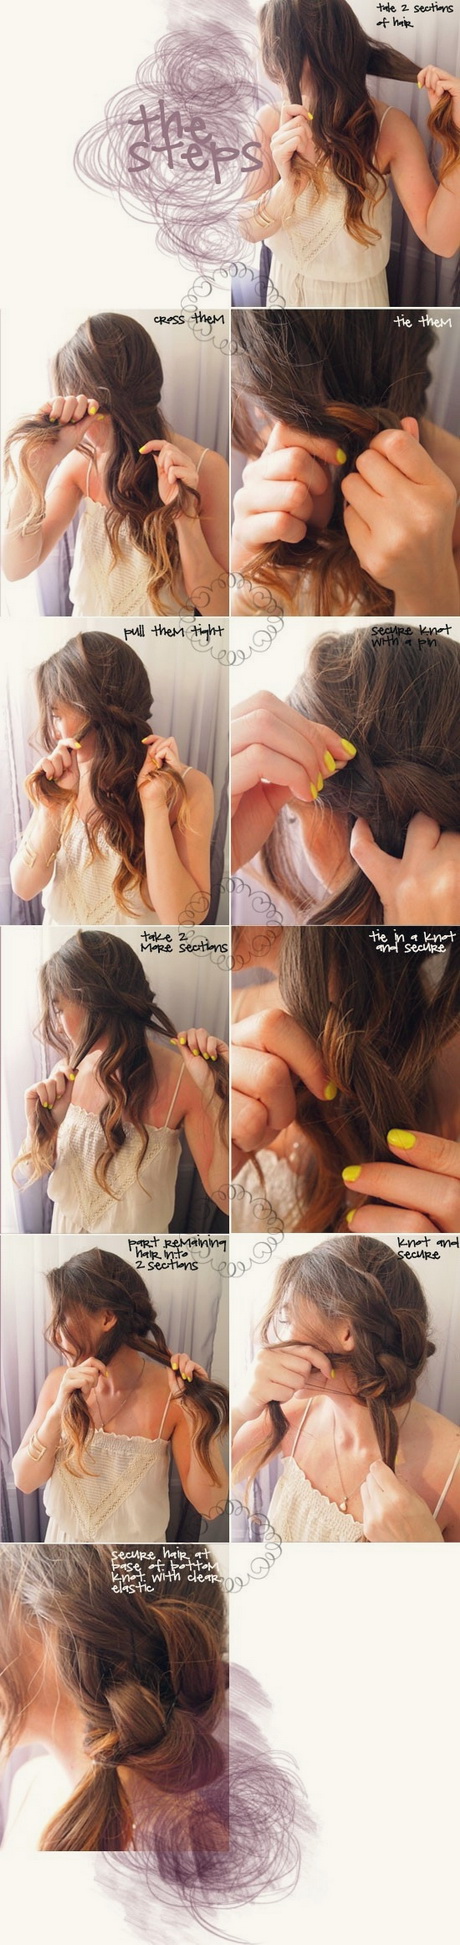 easy-french-braid-hairstyles-86-8 Easy french braid hairstyles